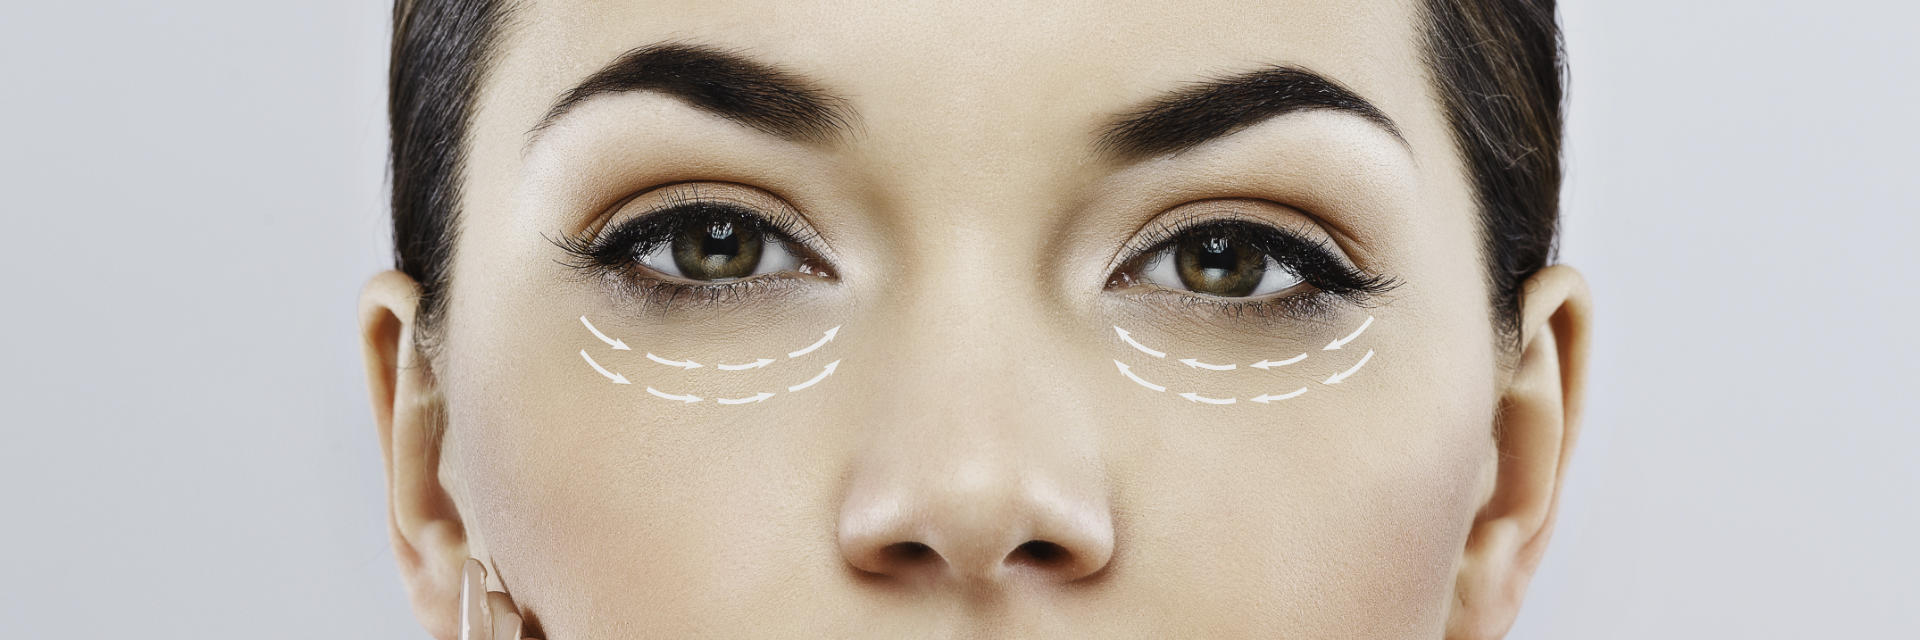 Blepharoplasty is one of these procedures